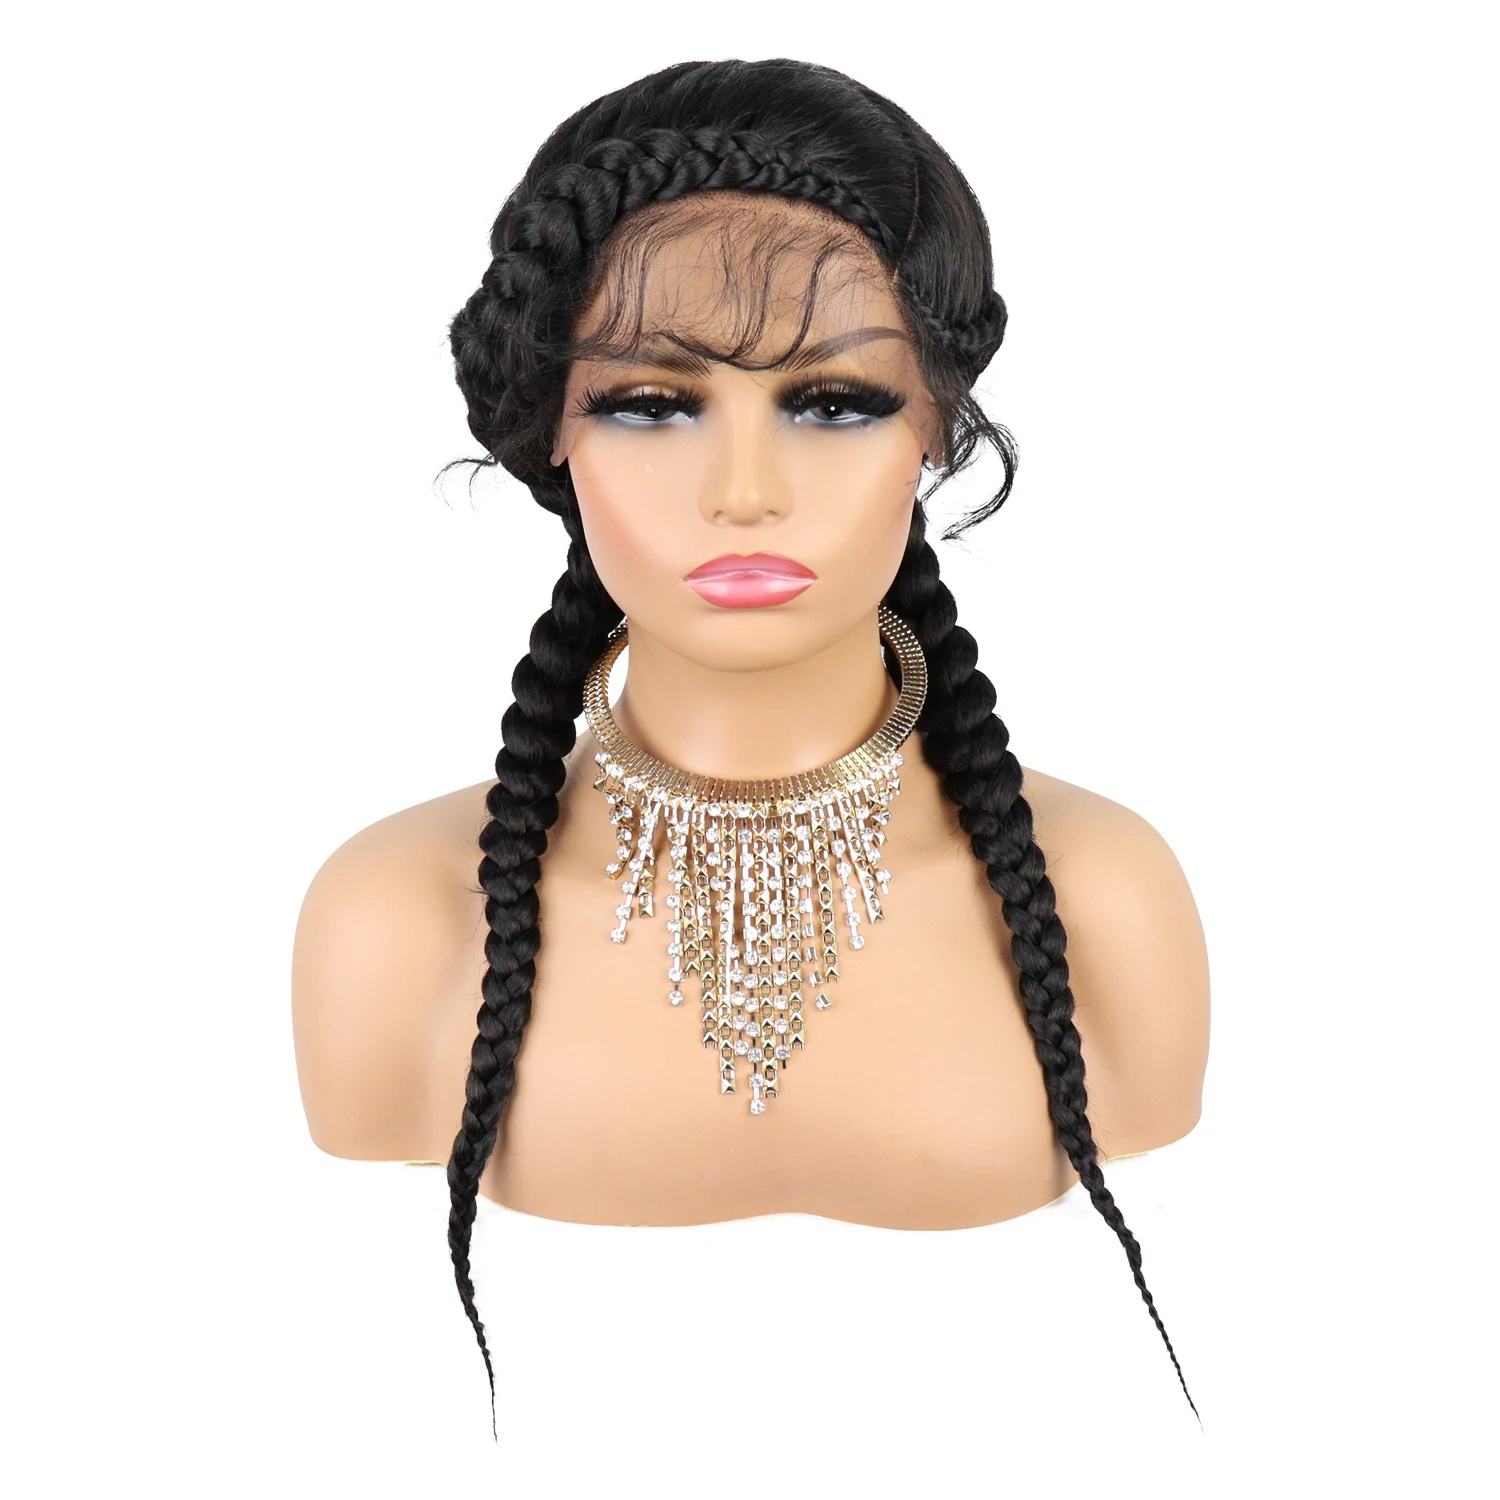 2 Box Braids Omber Black Blone Synthetic Lace Frontal Wigs High Quality  Twist Lace Wigs For Black Women